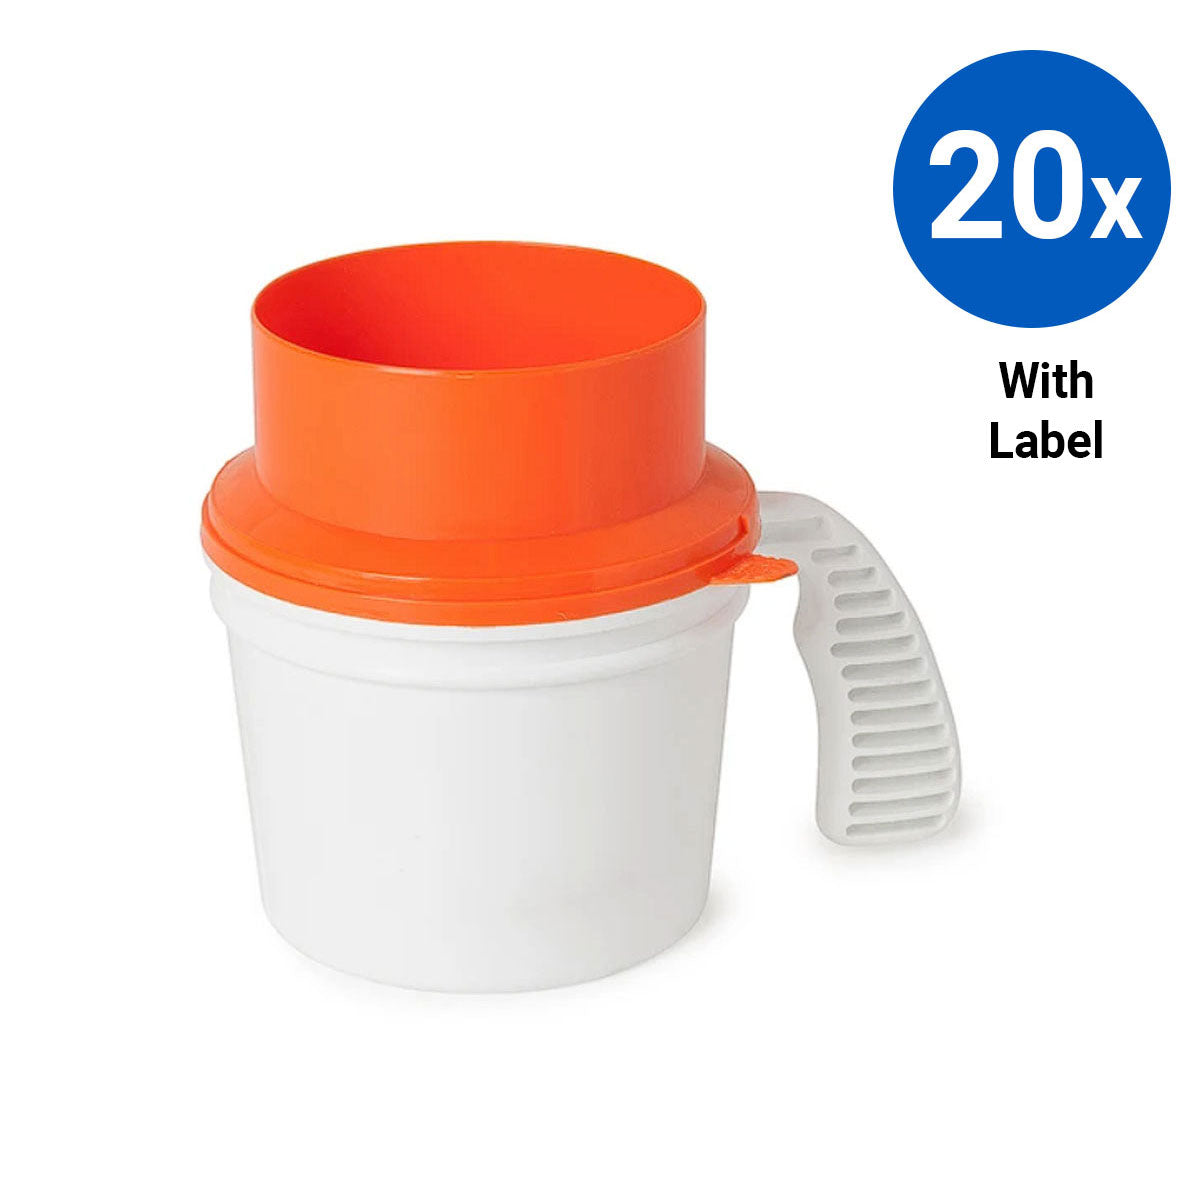 20x Collection Container Base and Quick Drop Lid with Labels - Orange